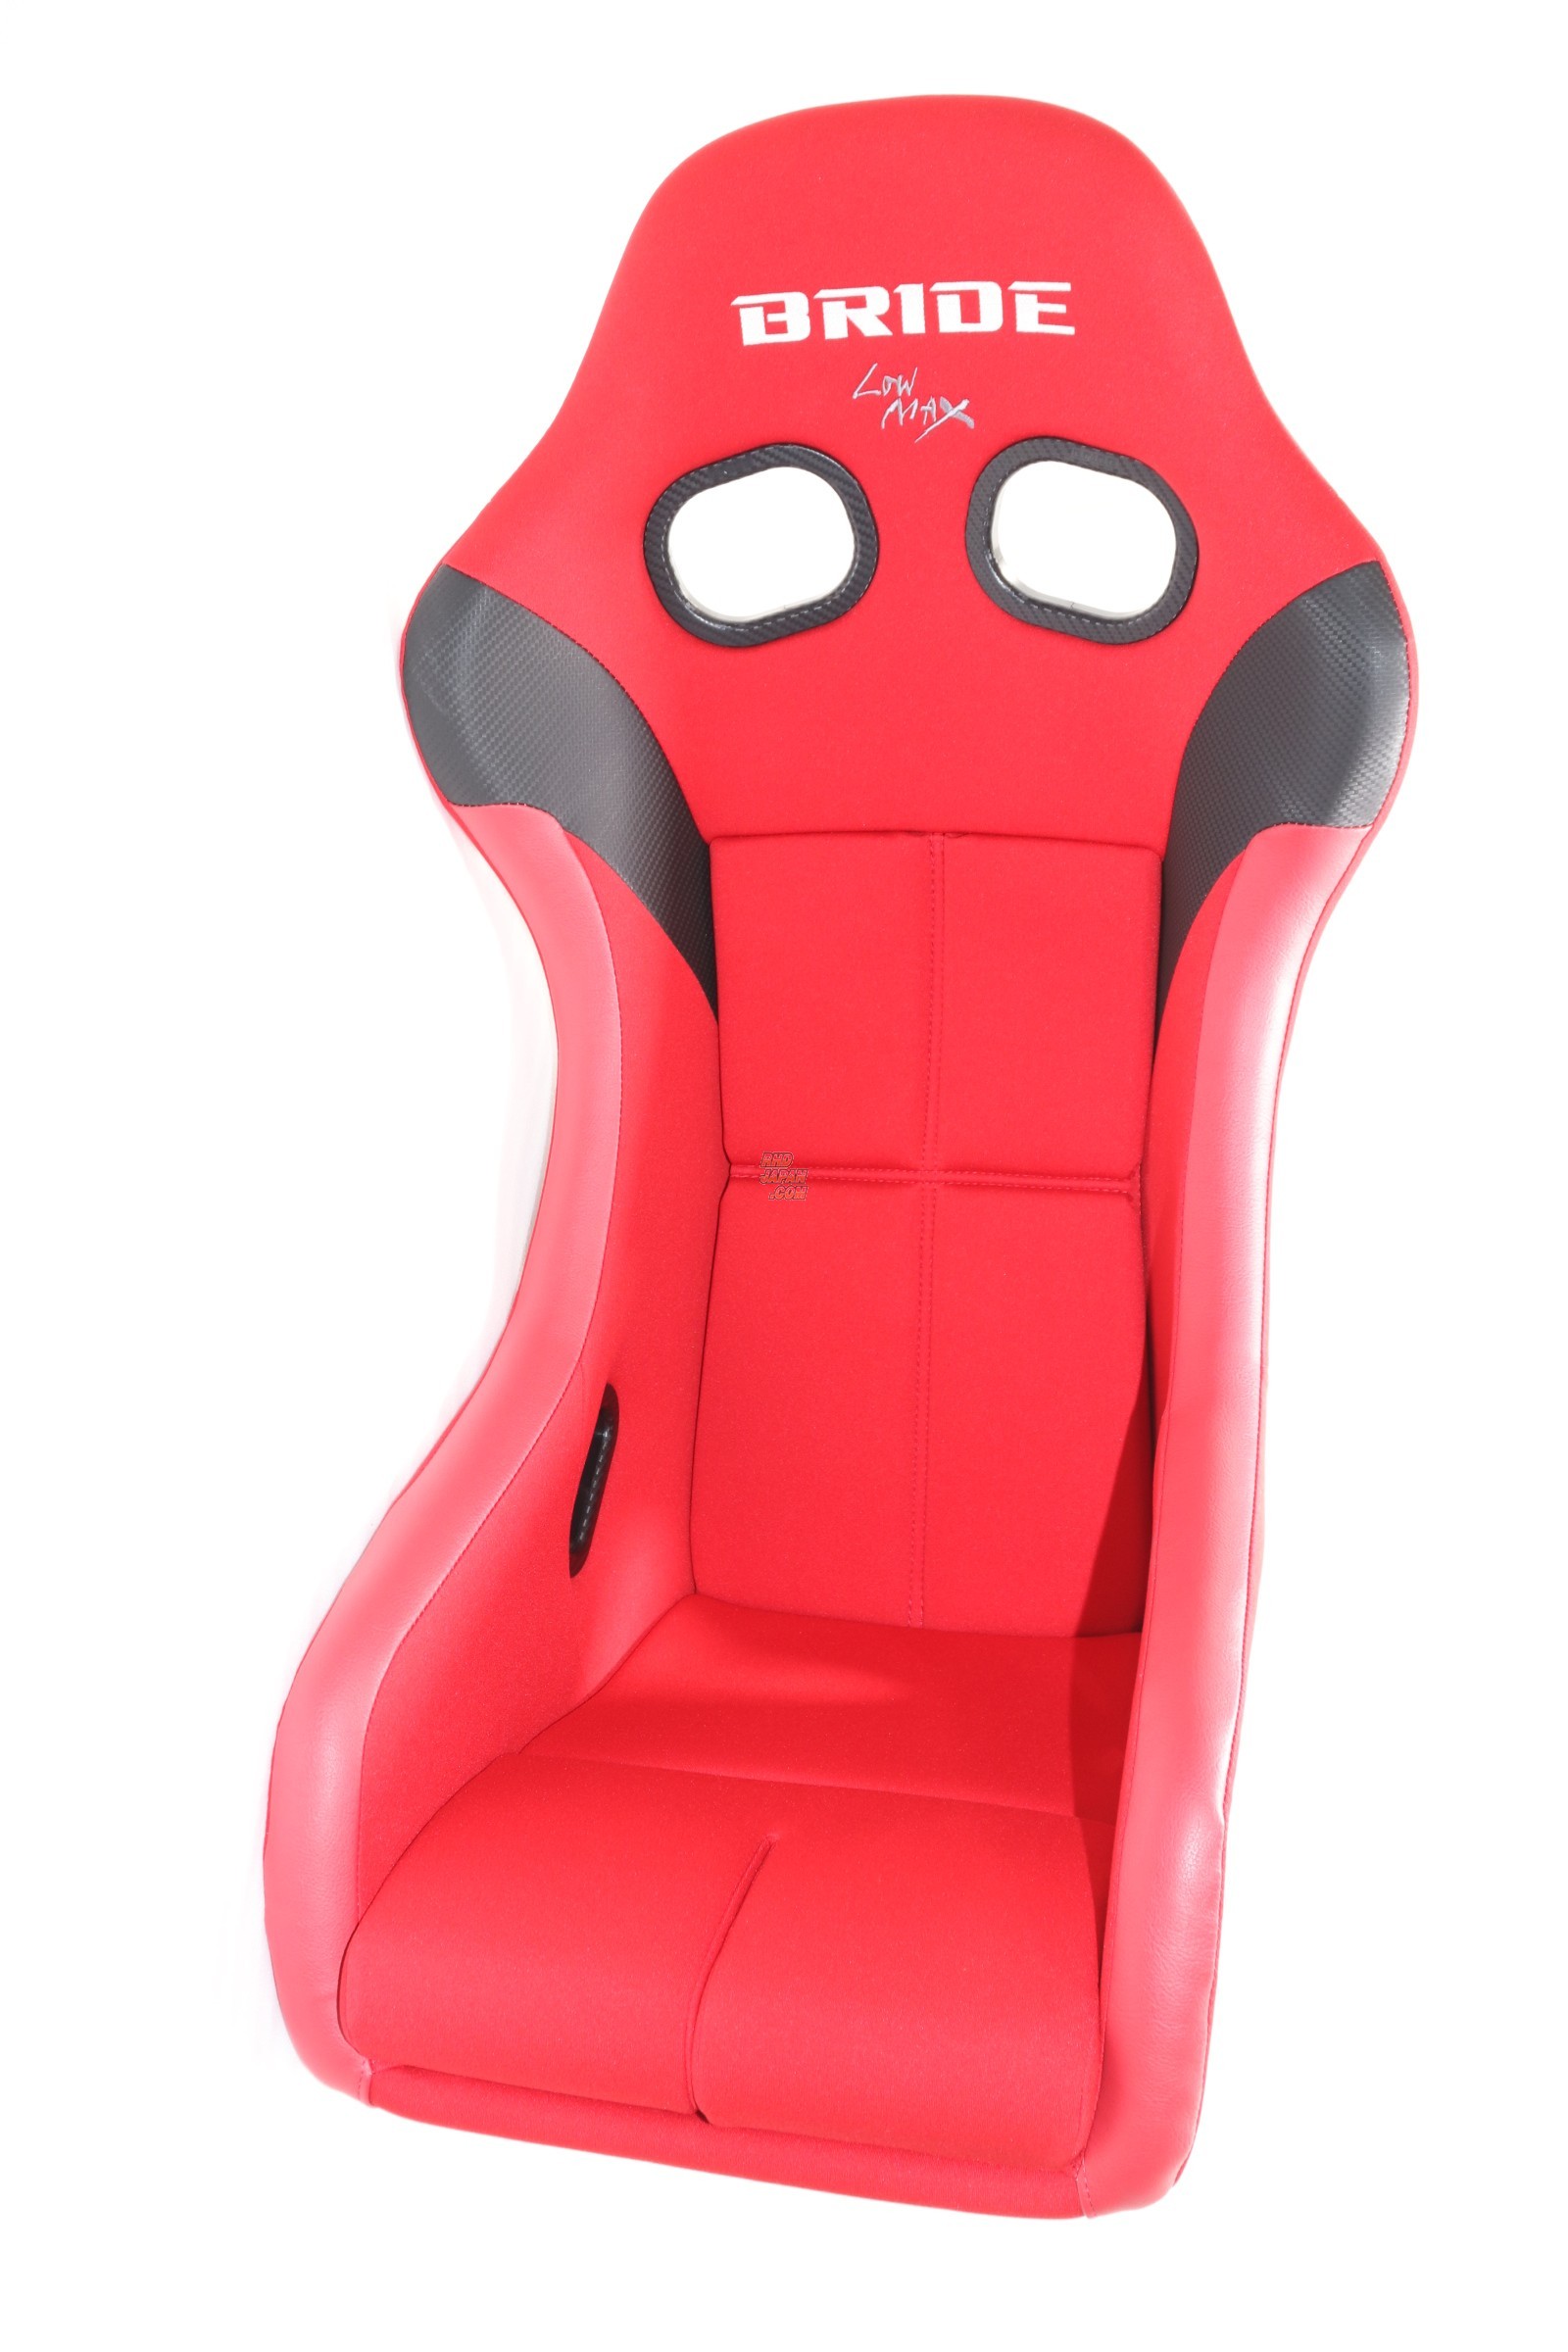 BRIDE ZETA IV Low Max Full Bucket Seat - Red FRP Shell